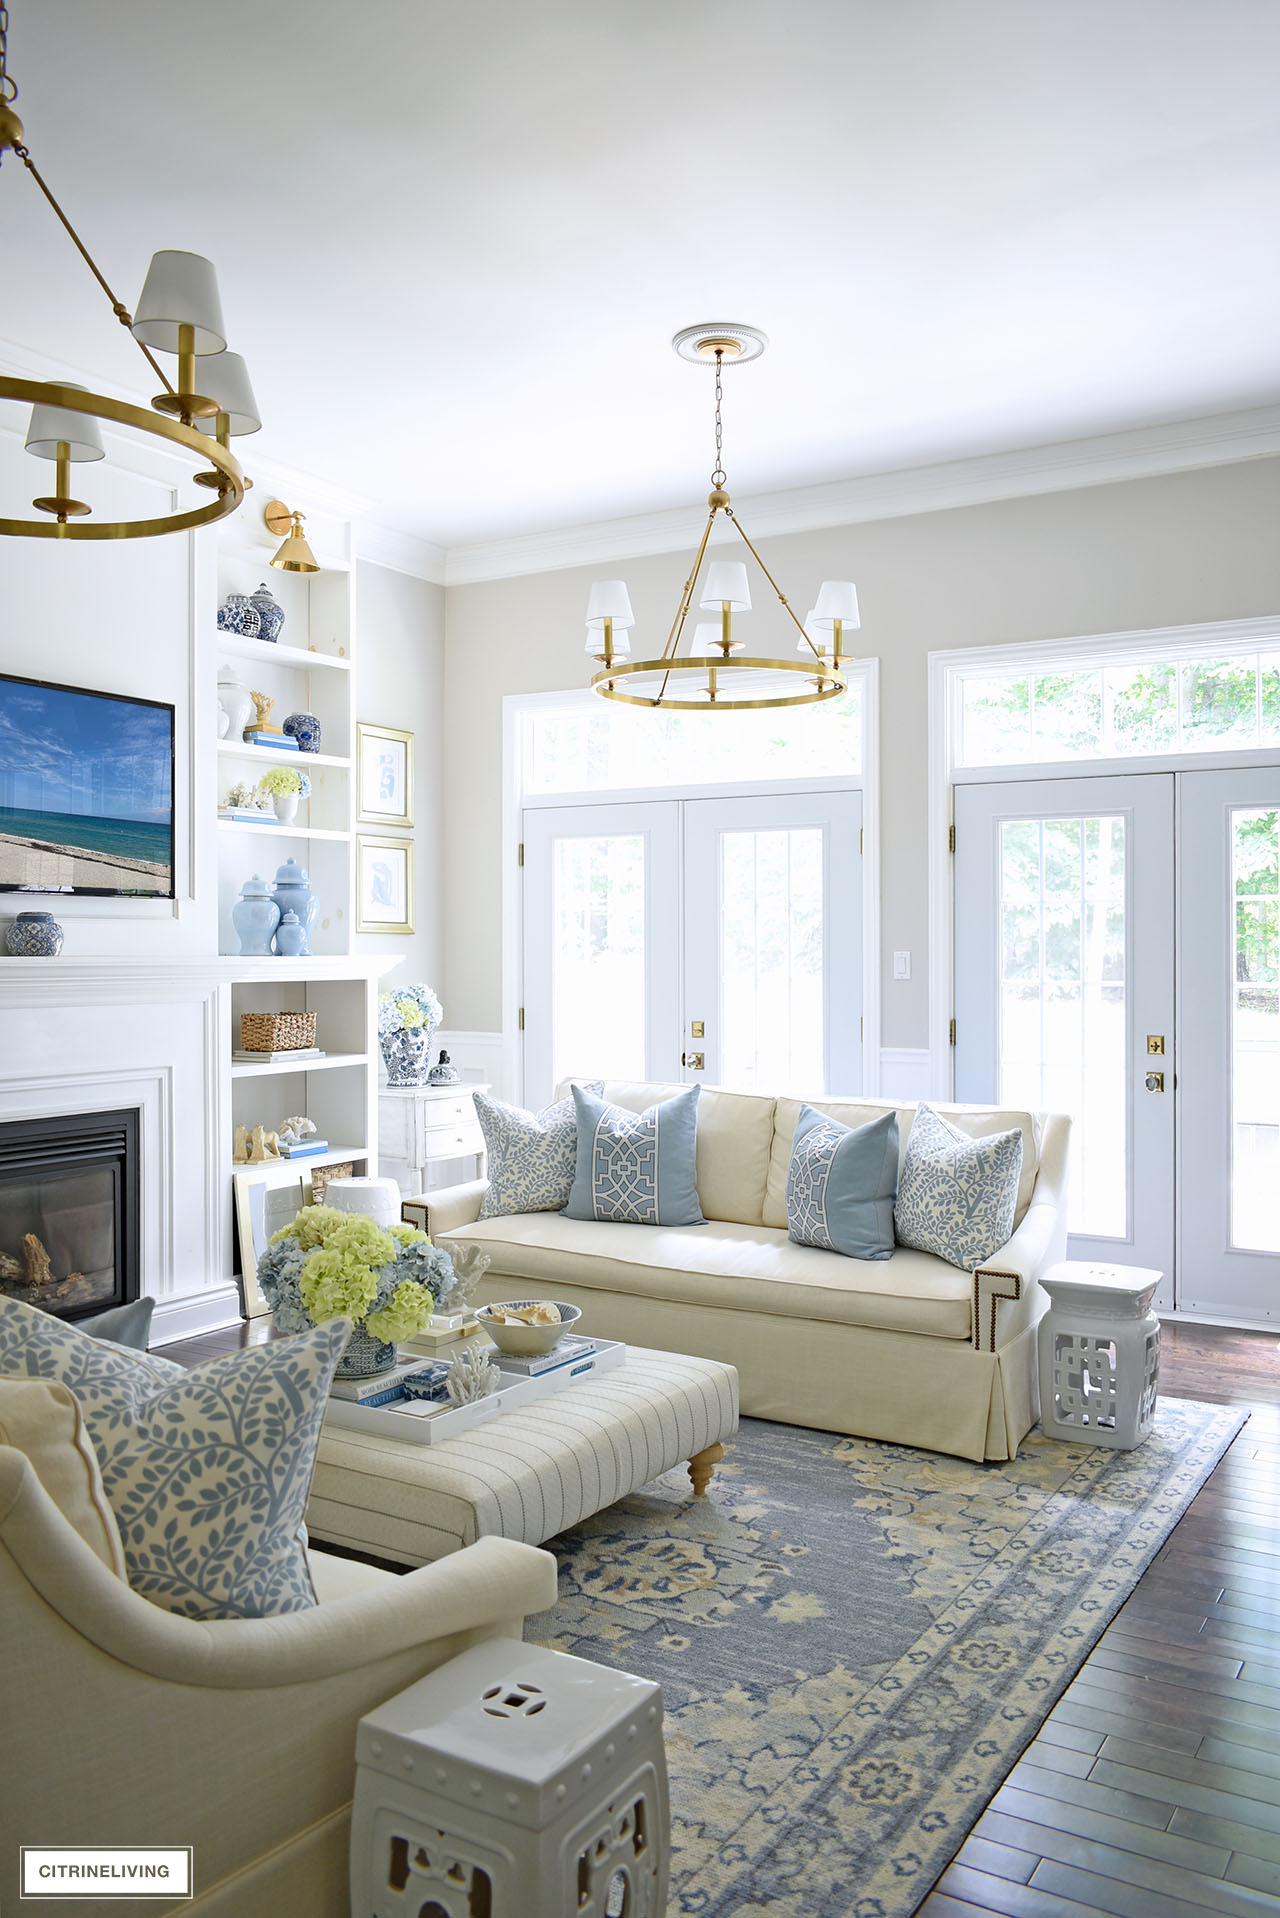 Elegant living room decorated for summer with a gorgeous light blue and white color palette, hydrangeas, ginger jars, woven accents and coastal accessories.